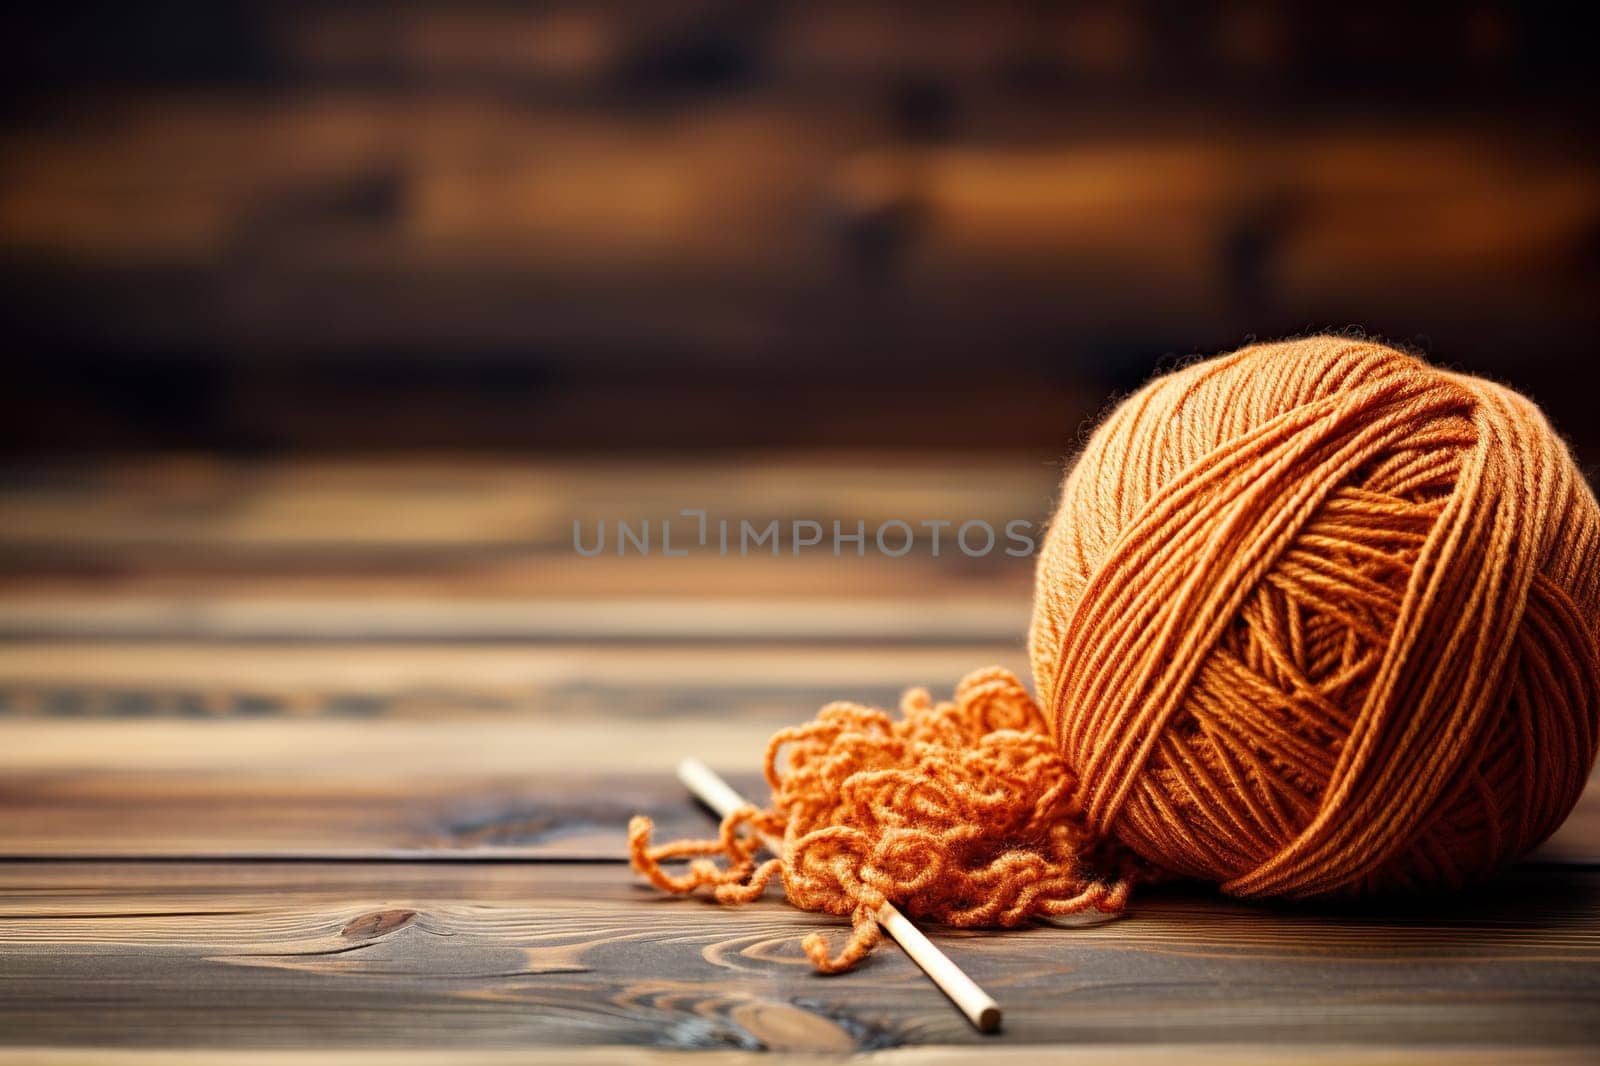 A ball of brown yarn for knitting on a wooden surface.